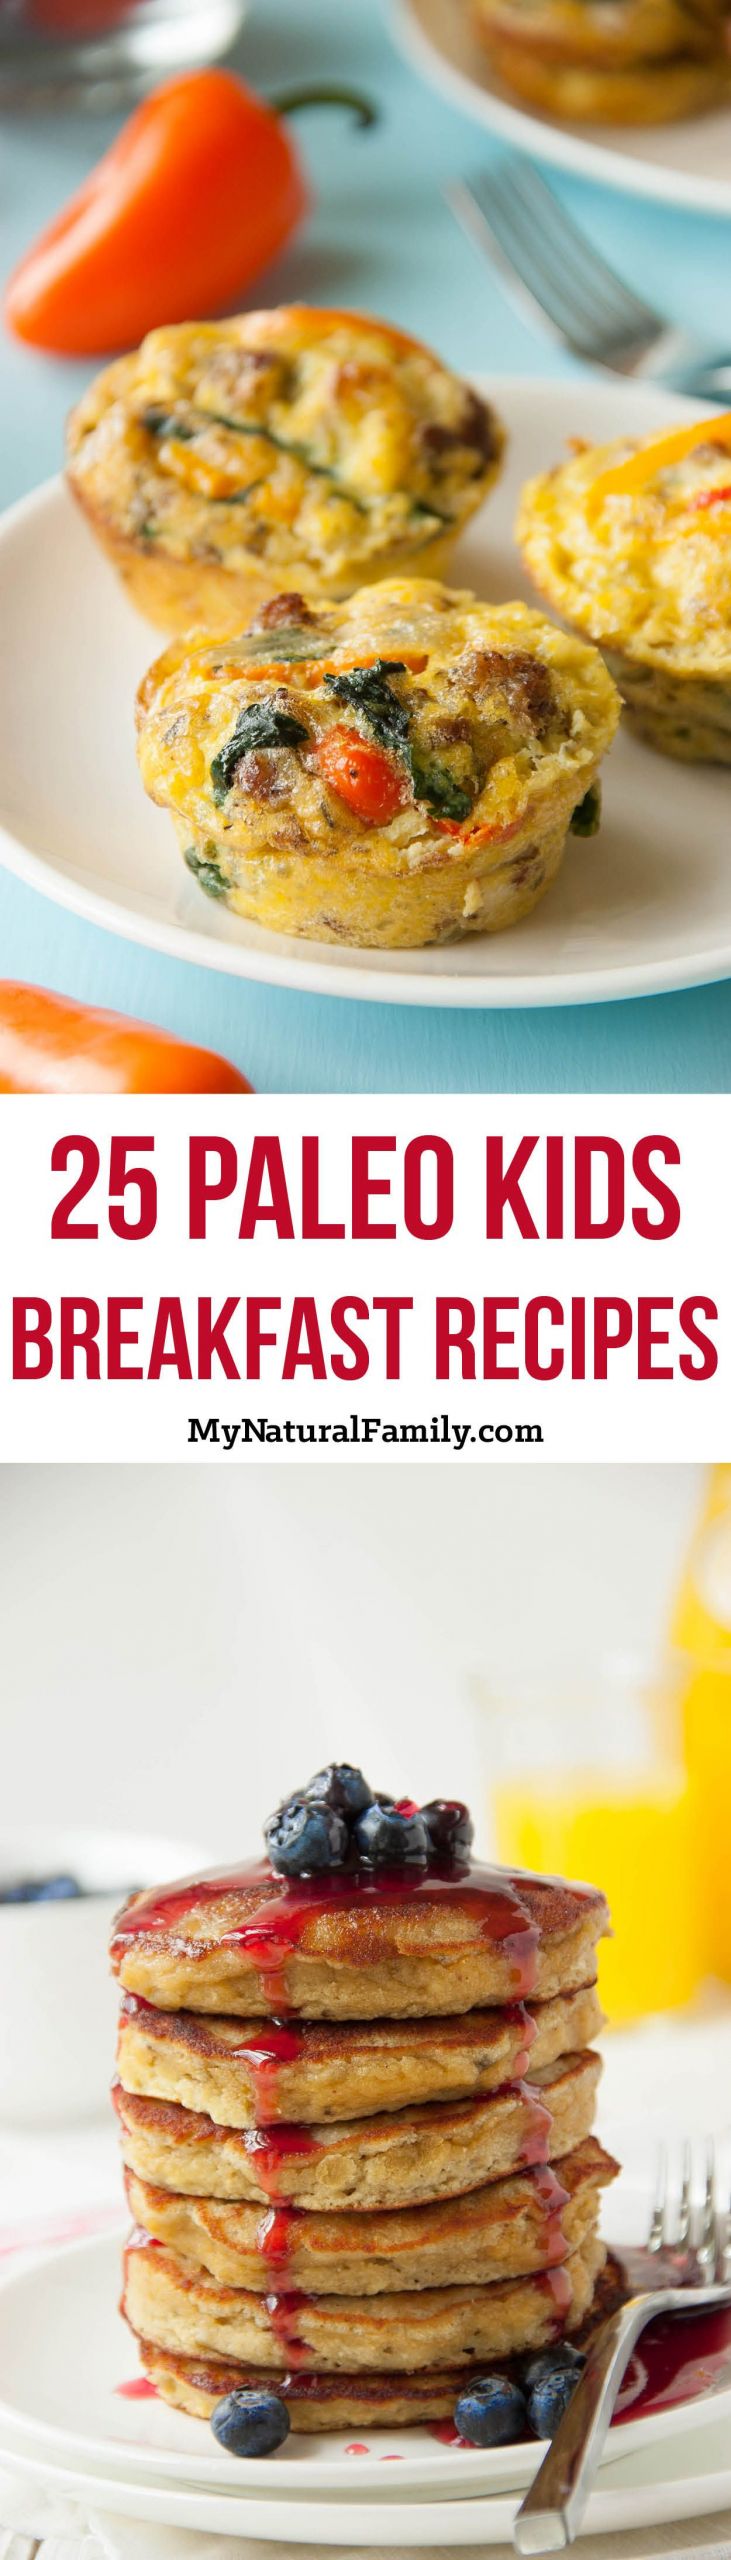 Paleo Breakfast For Kids
 Paleo for Kids Recipes They ll Actually Eat Anytime My